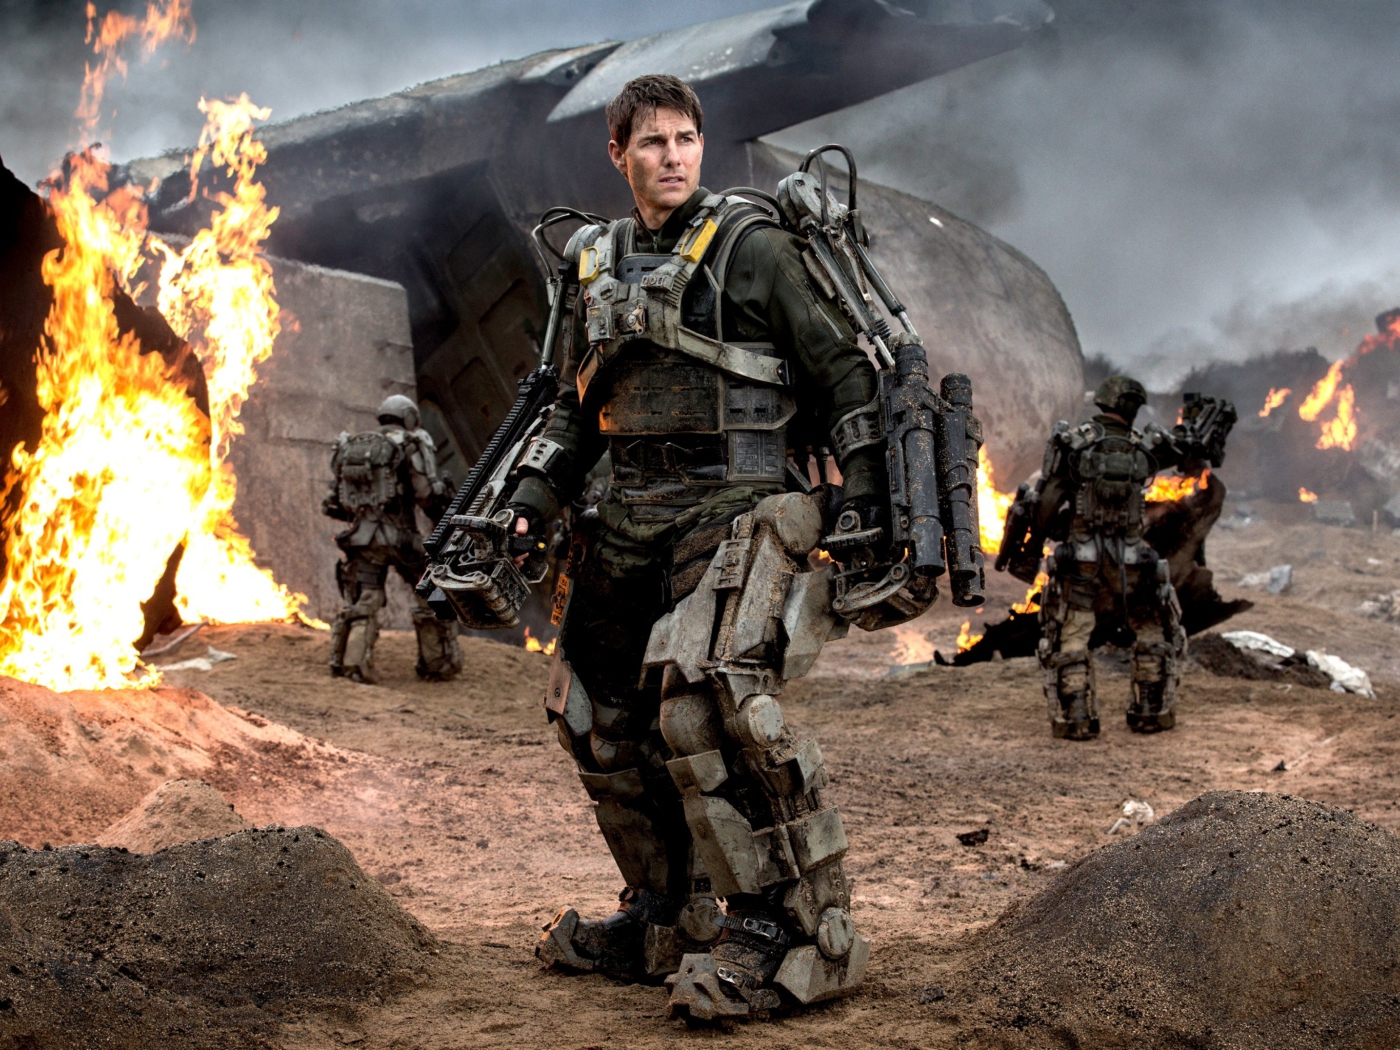 Edge Of Tomorrow With Tom Cruise wallpaper 1400x1050